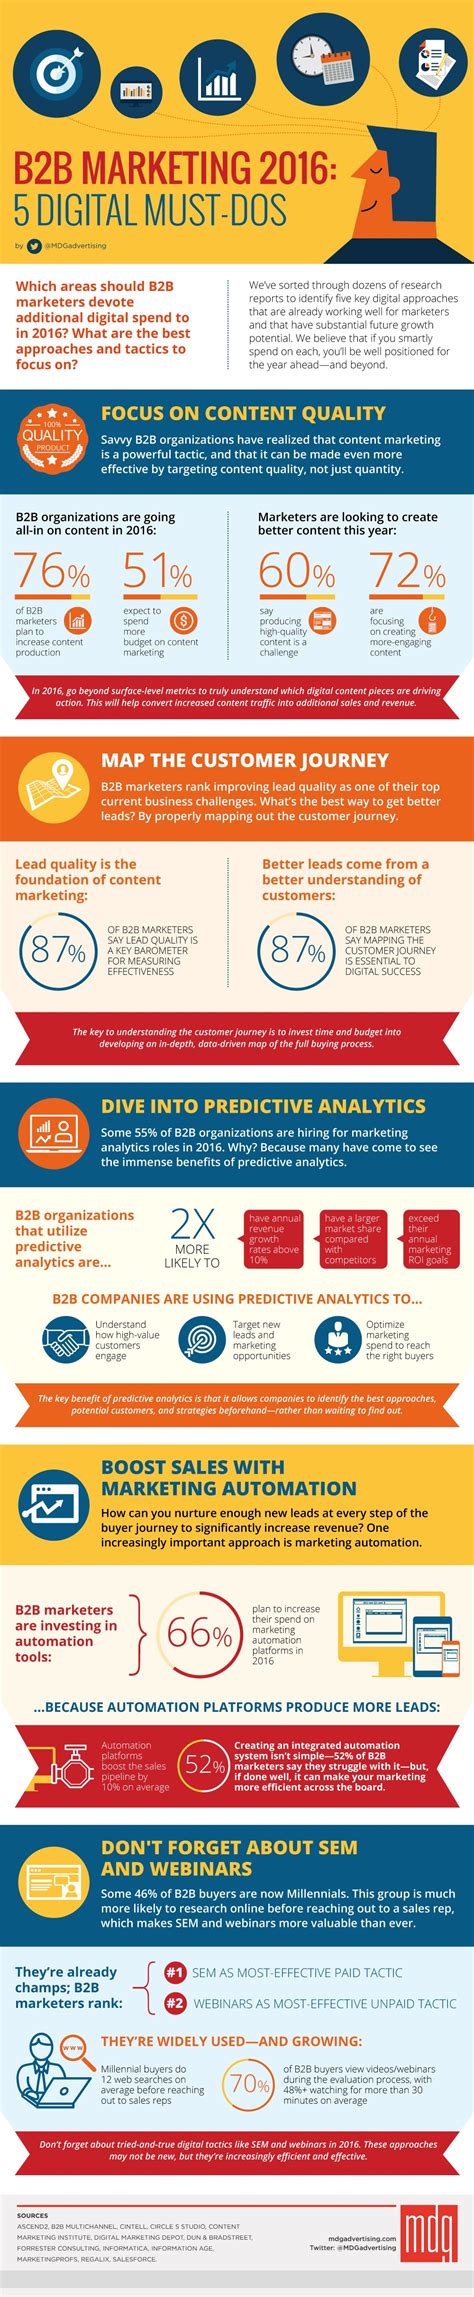 The position or strategy by which your the most effective b2b marketing strategies. #B2B Marketing 2016: 5 Digital Must-Dos - #Infographic ...